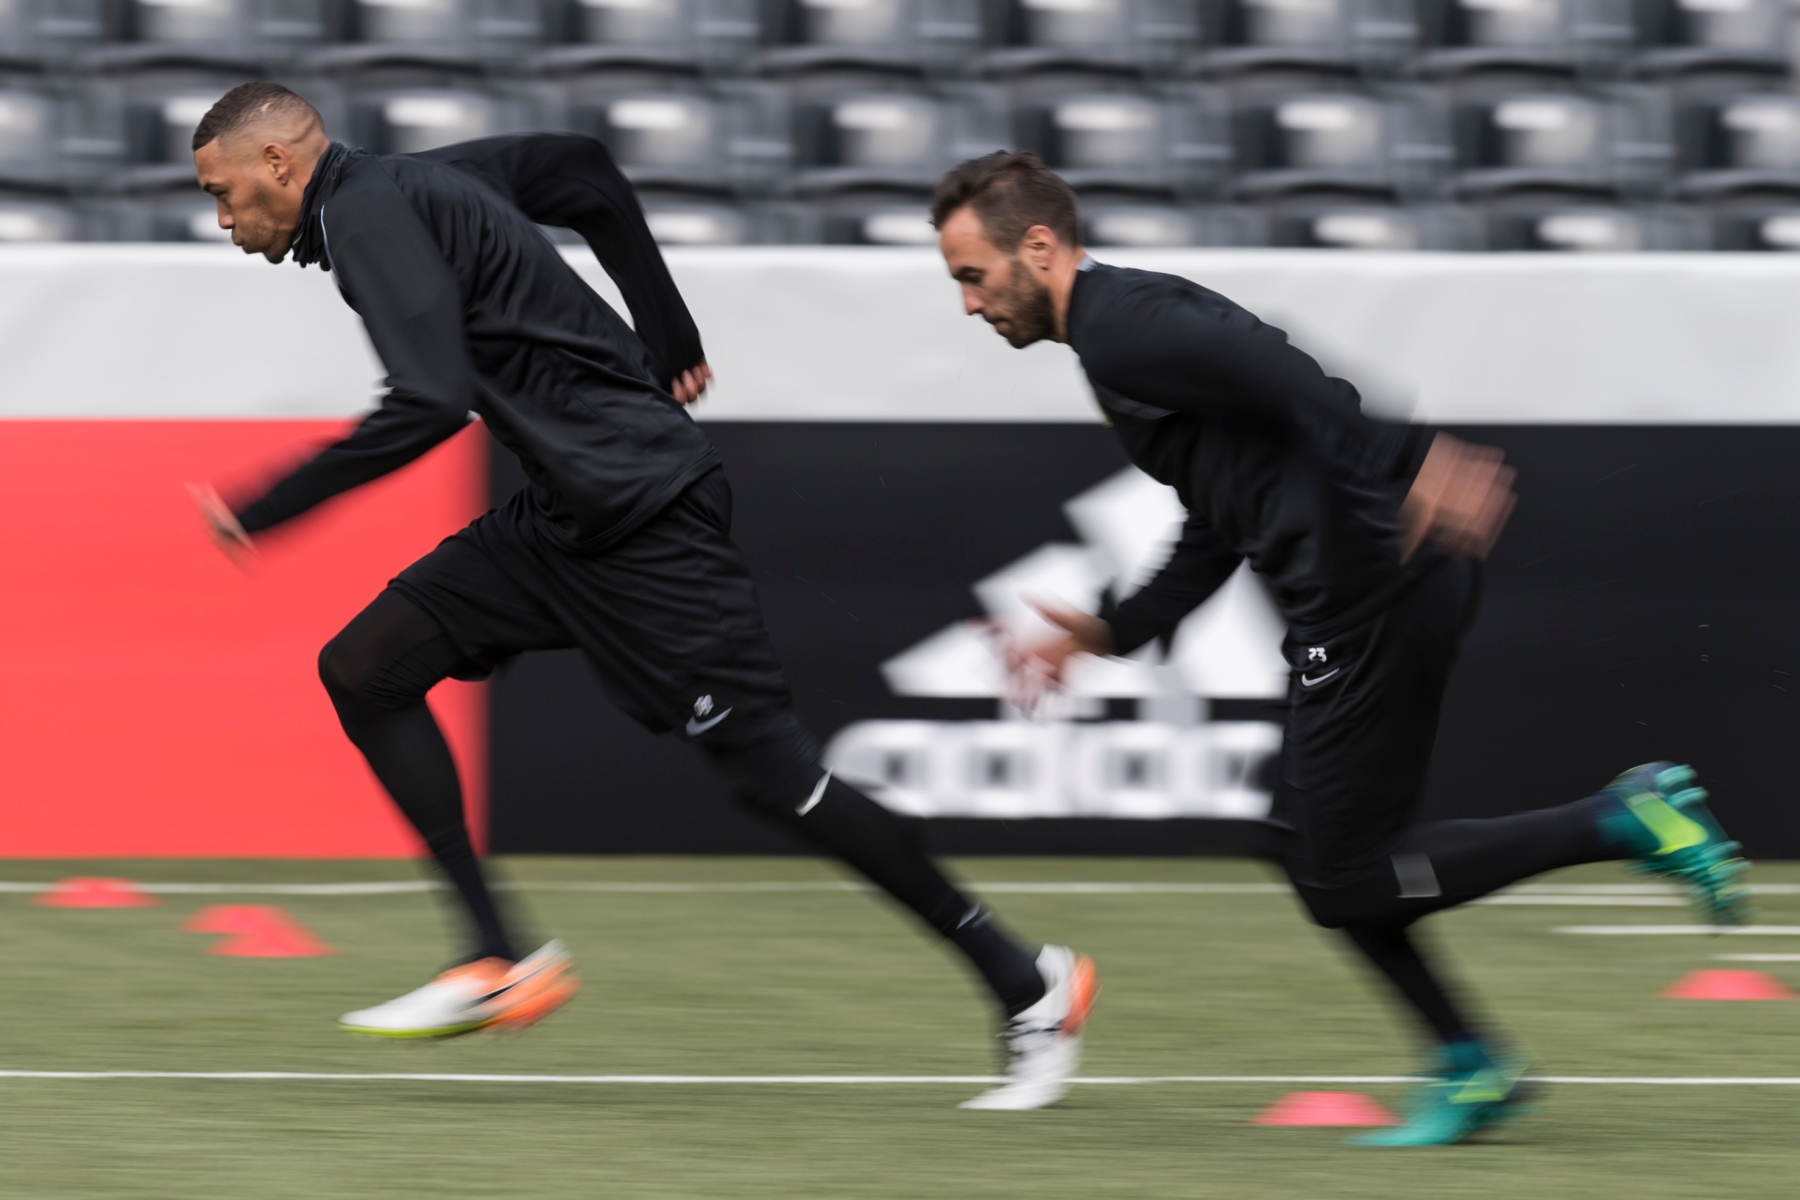 Guillaume Hoarau, left, and Scott Sutter of BSC Young Boys take a sprint during training ahead of Thursday's Europa League Group B soccer match against APOEL Nikosia, at the Stade de Suisse stadium, in Bern, Switzerland, Wednesday, October 19, 2016. (KEYSTONE/Alessandro della Valle) FUSSBALL EUROPA LEAGUE 2016/17 YB APOEL NIKOSIA